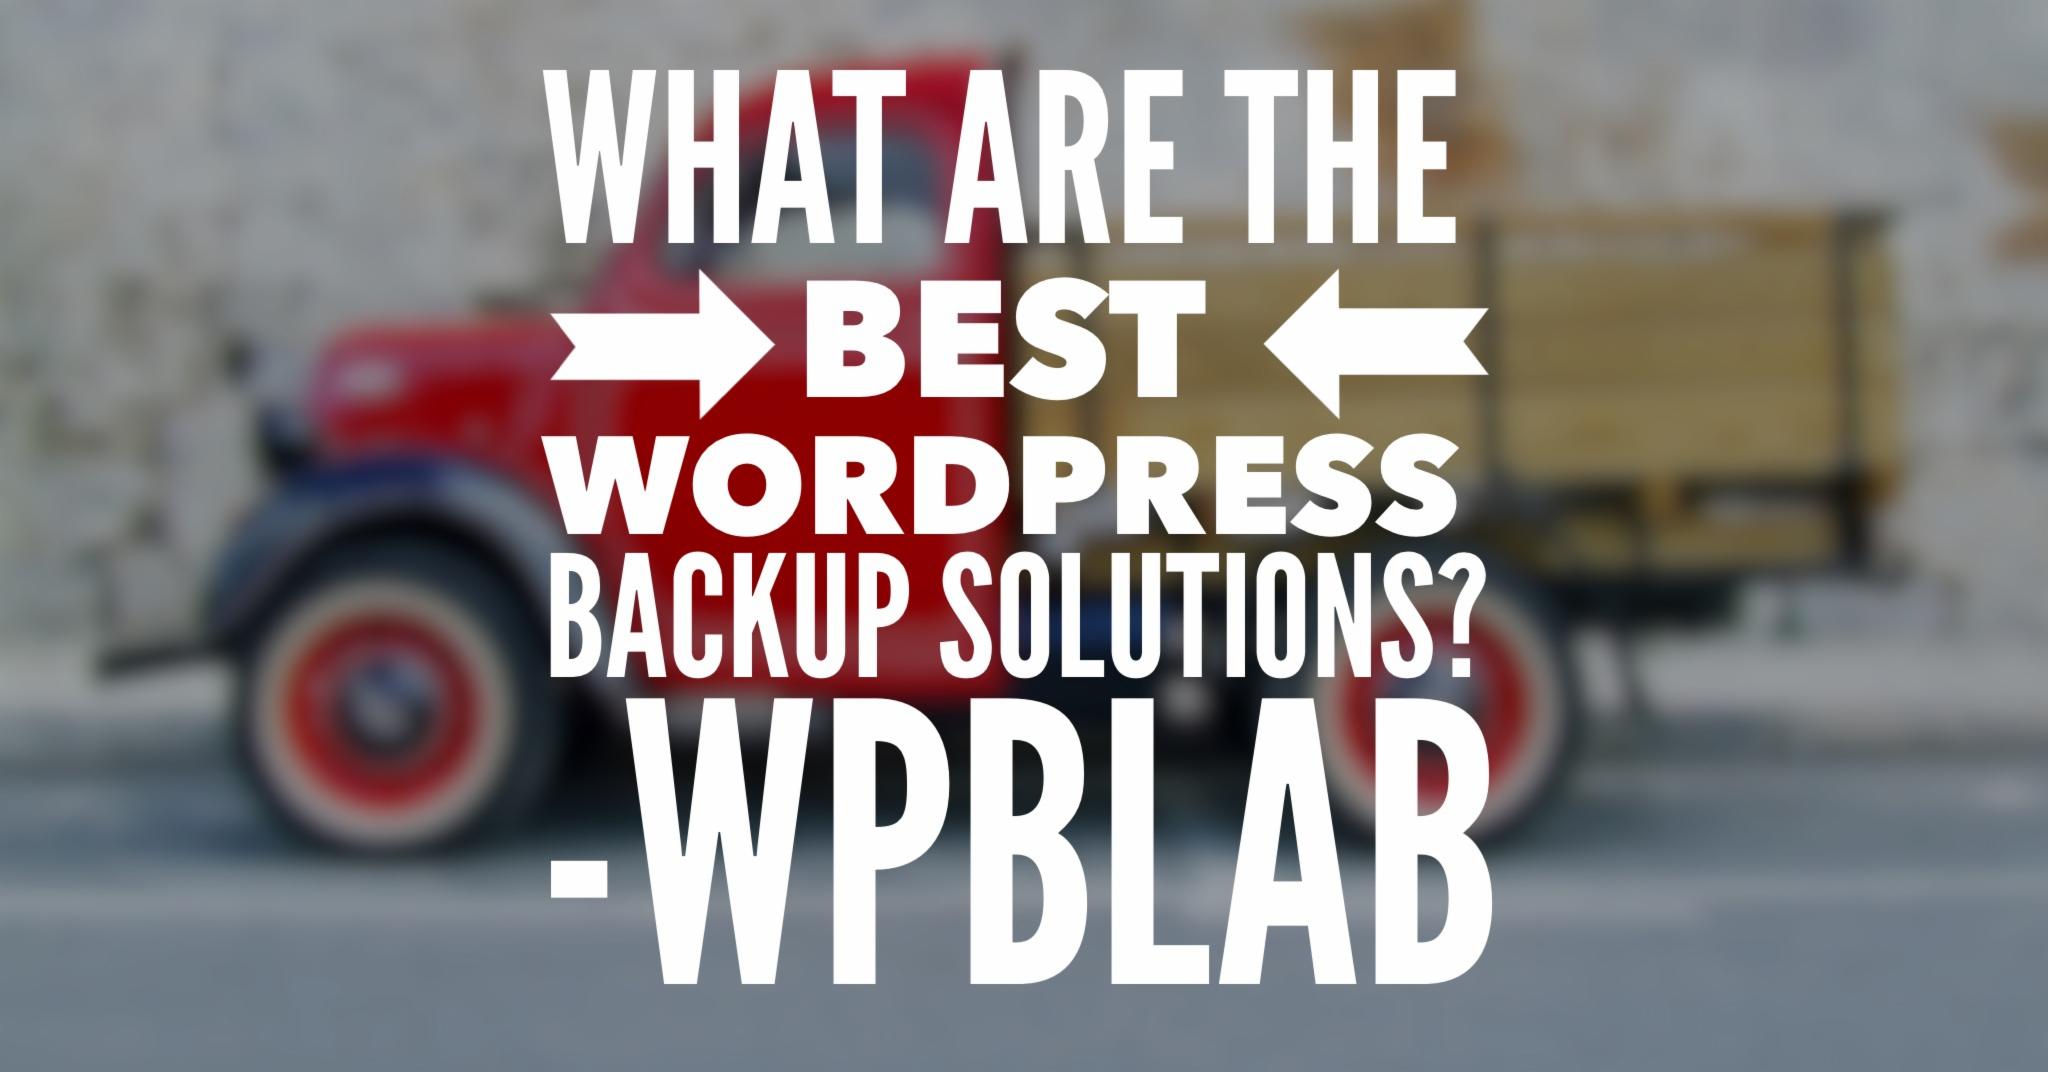 EP31 – What are the best #WordPress backup solutions? – #WPblab